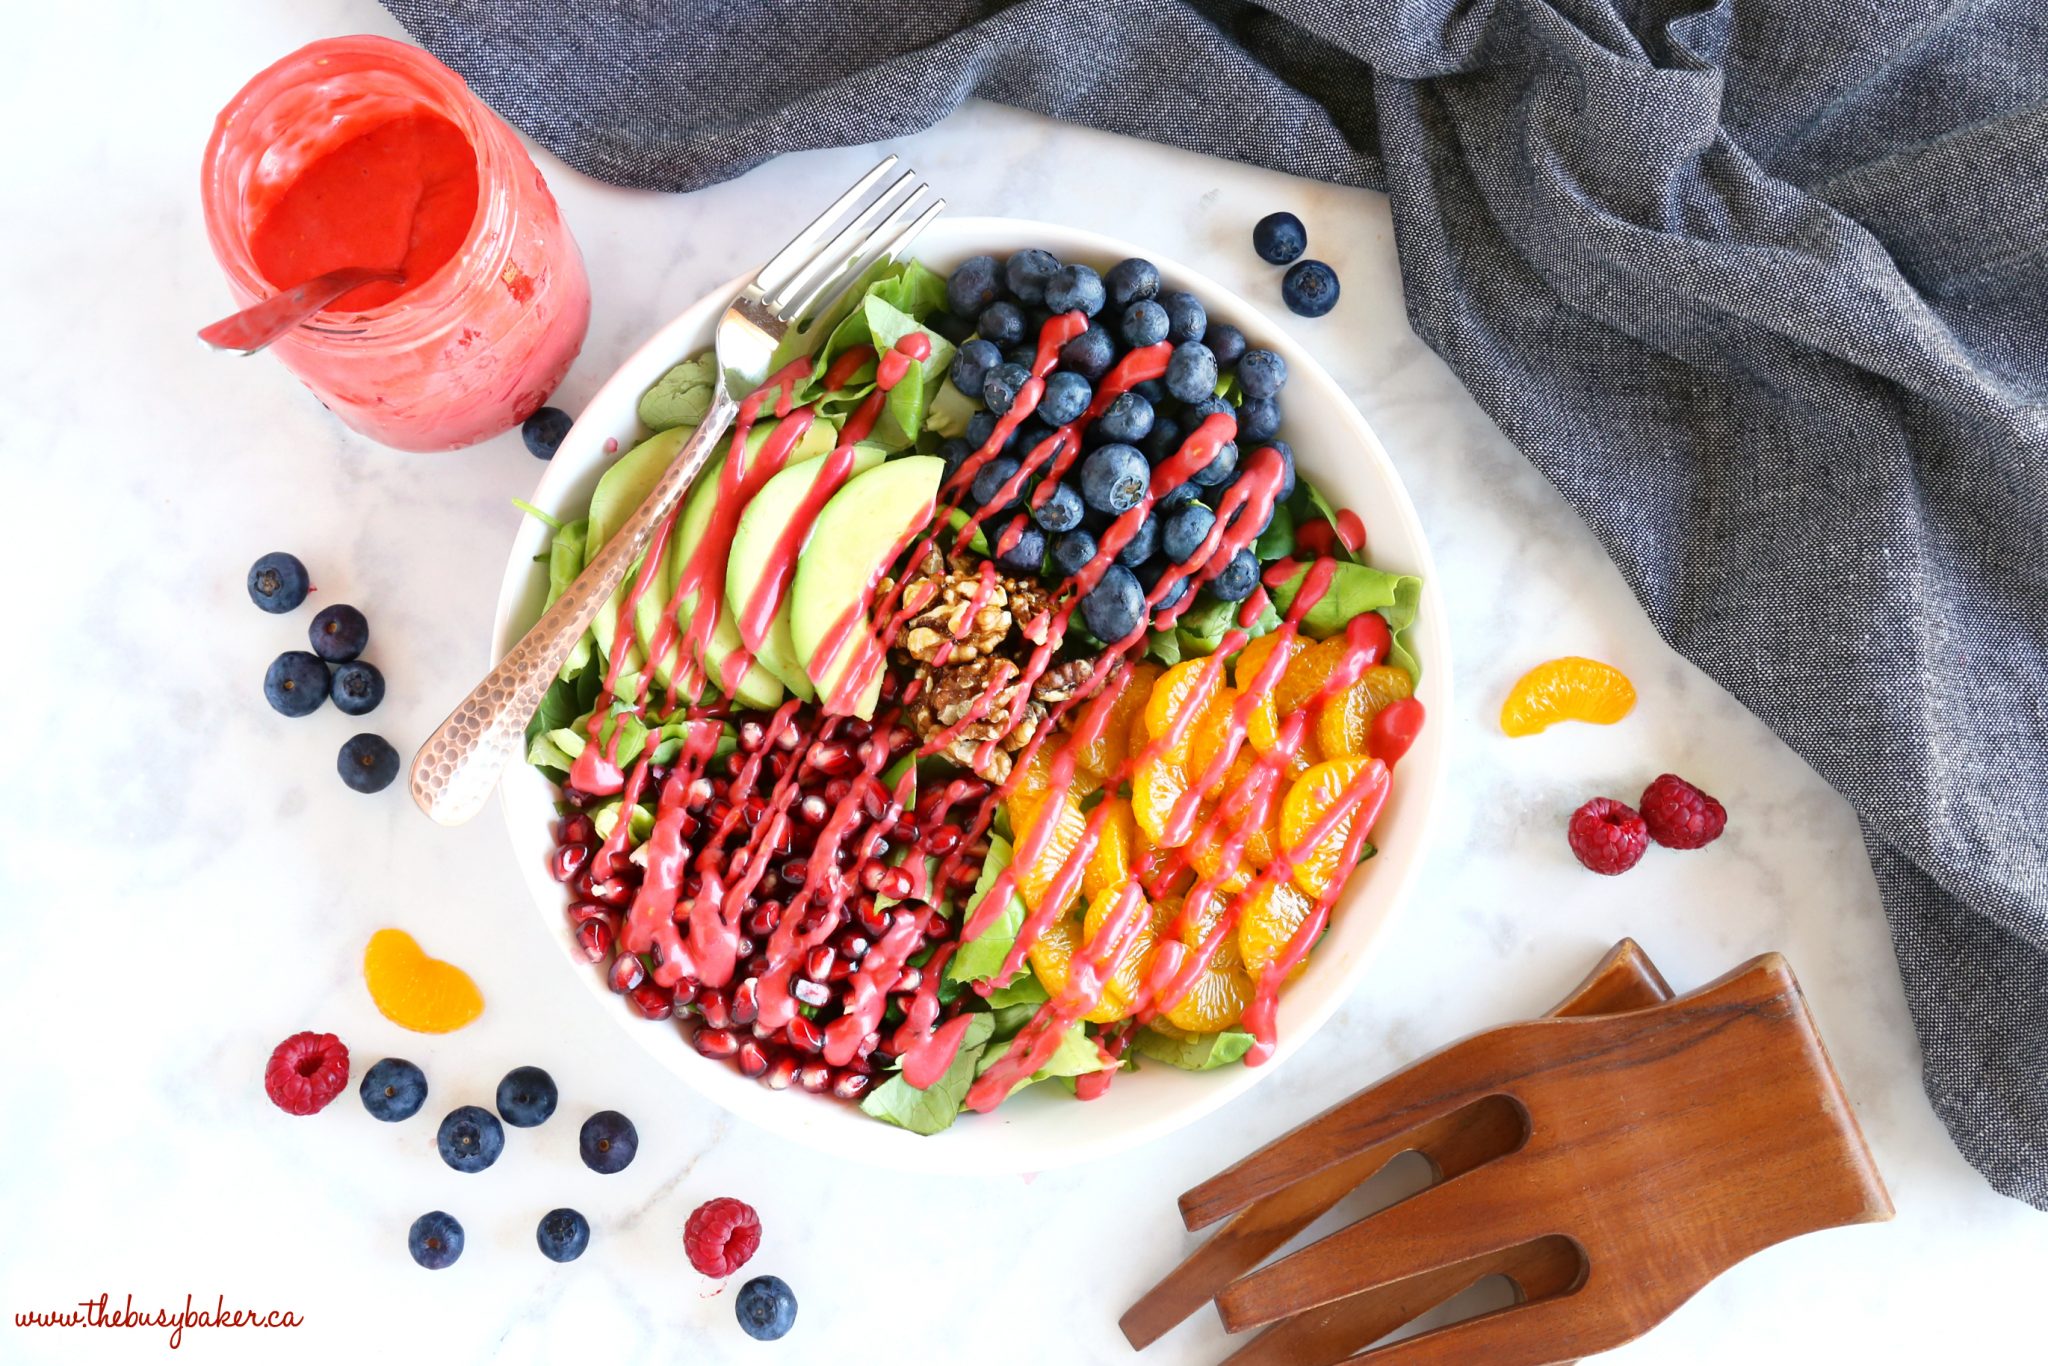 Orange Berry Pomegranate Superfood Salad - The Busy Baker